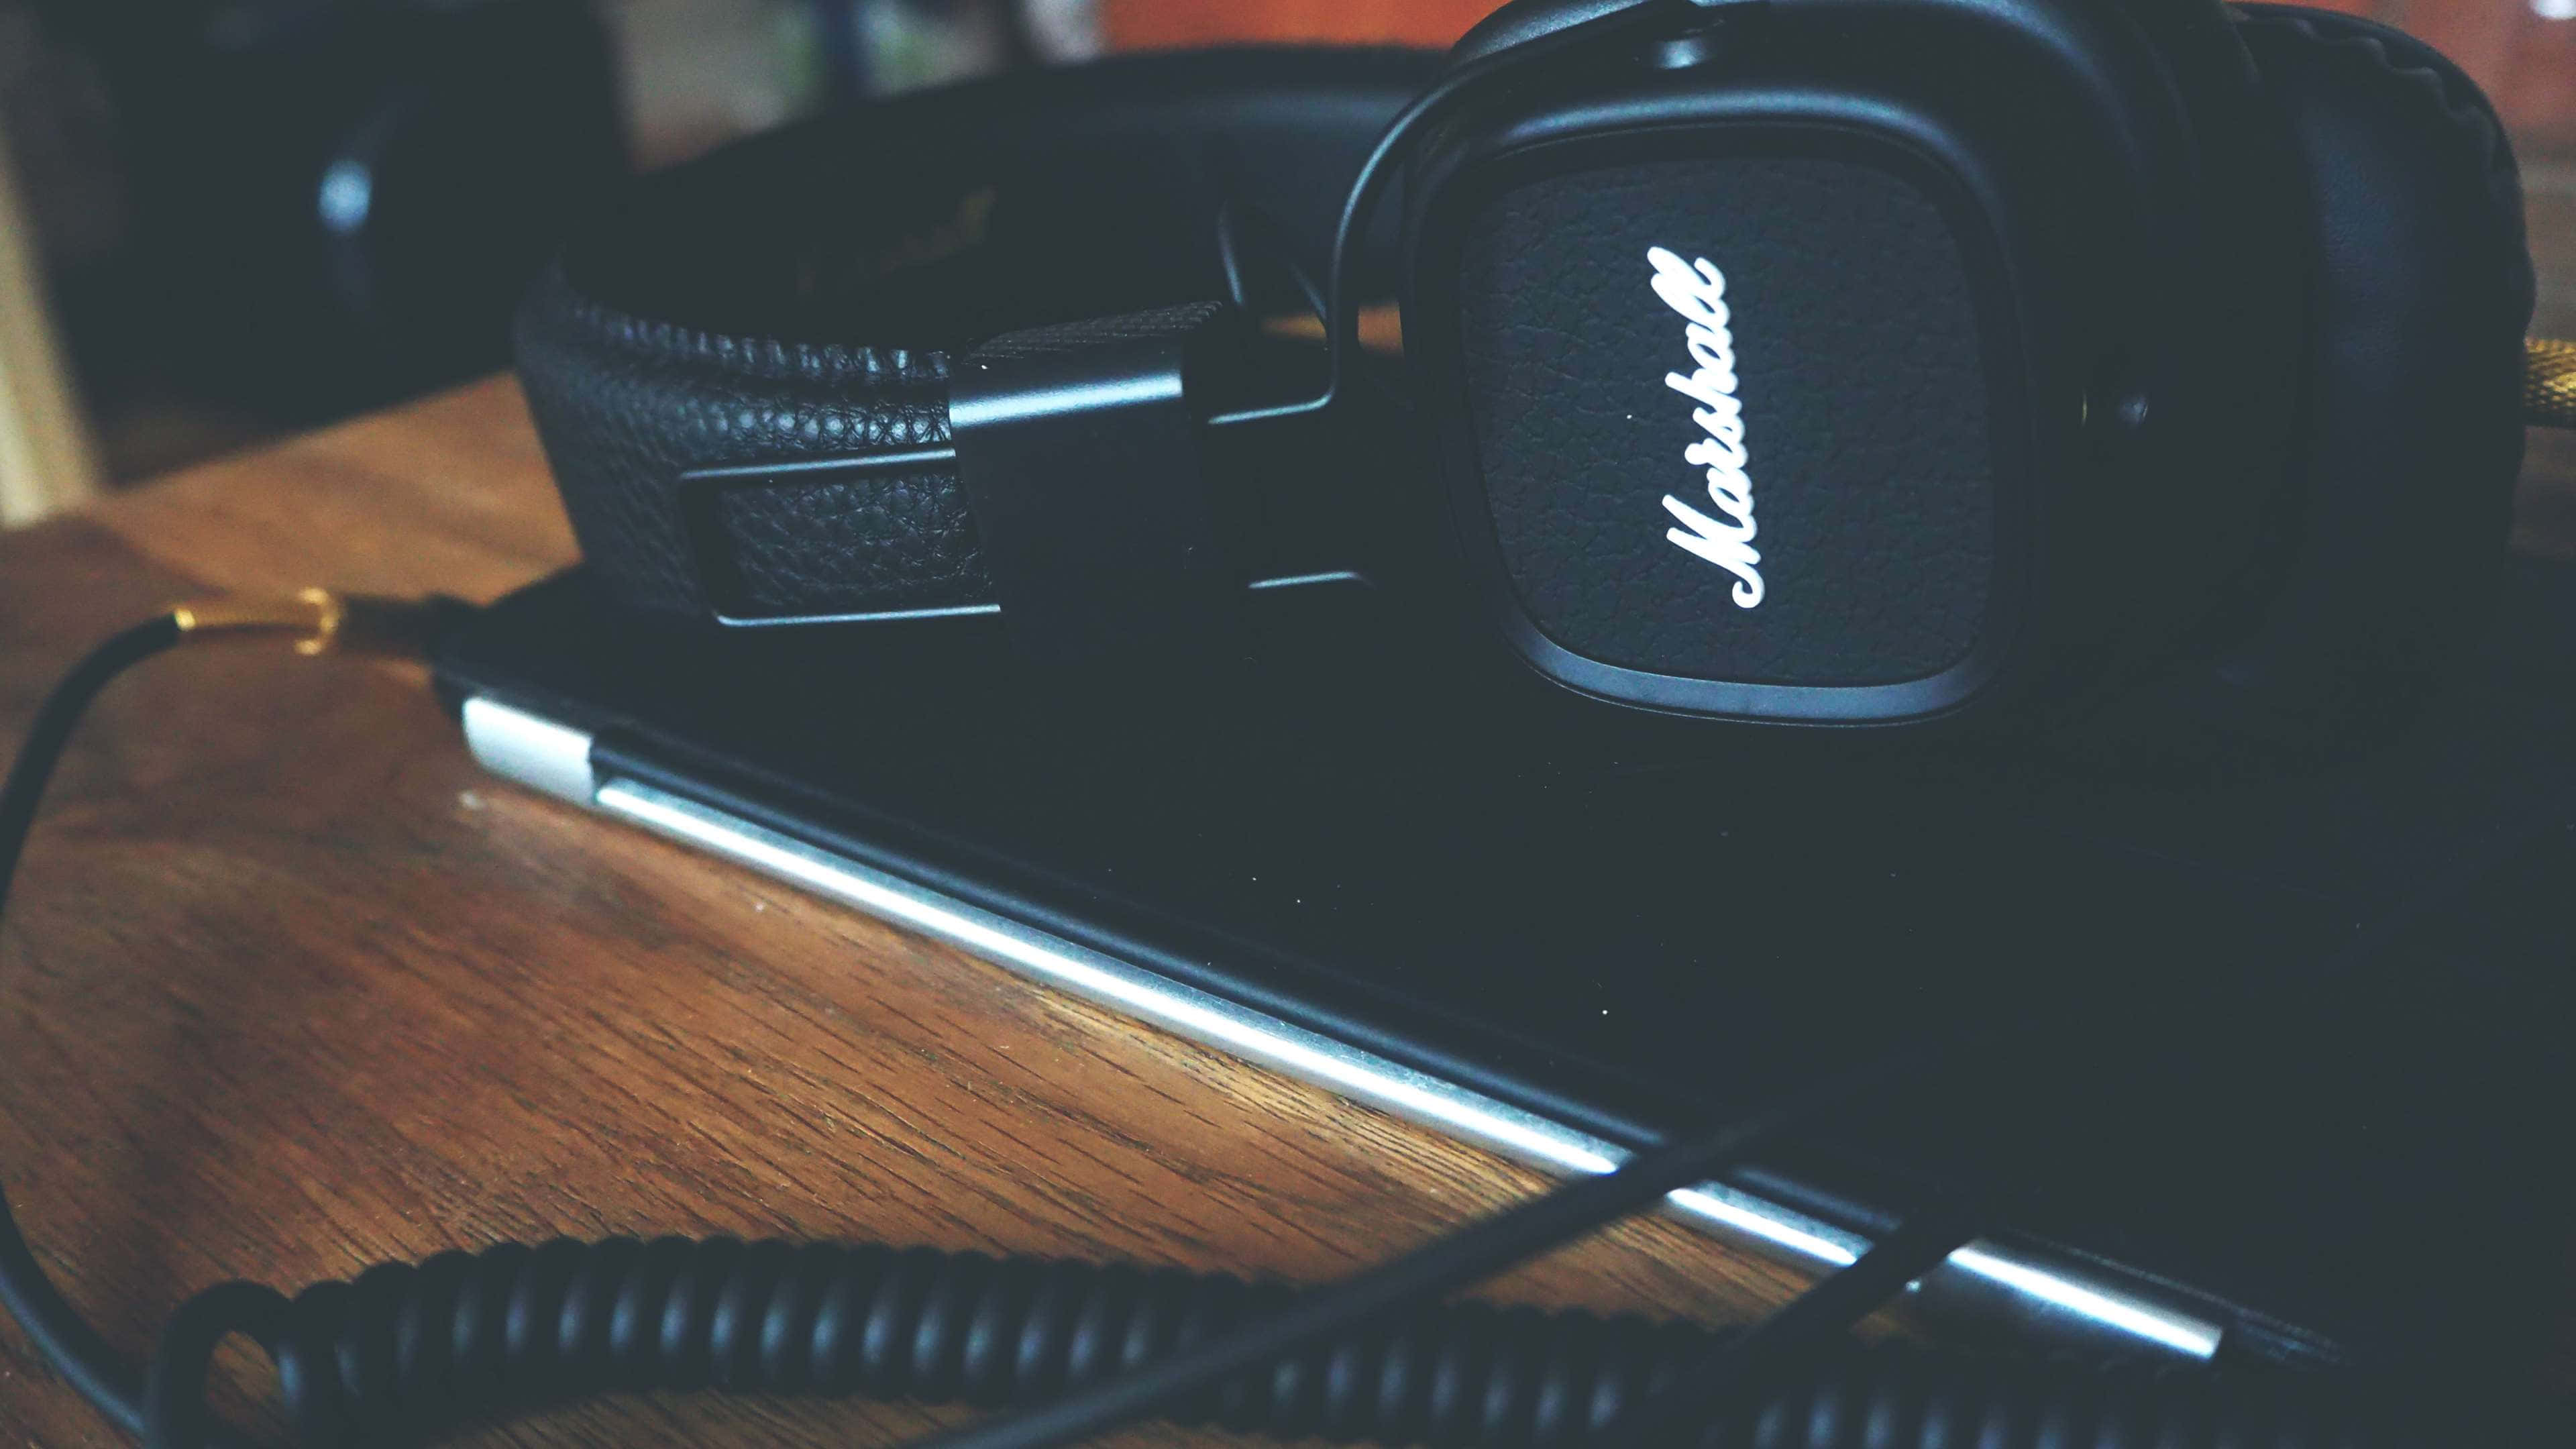 Get things done and enjoy your music with a laptop and headphones Wallpaper